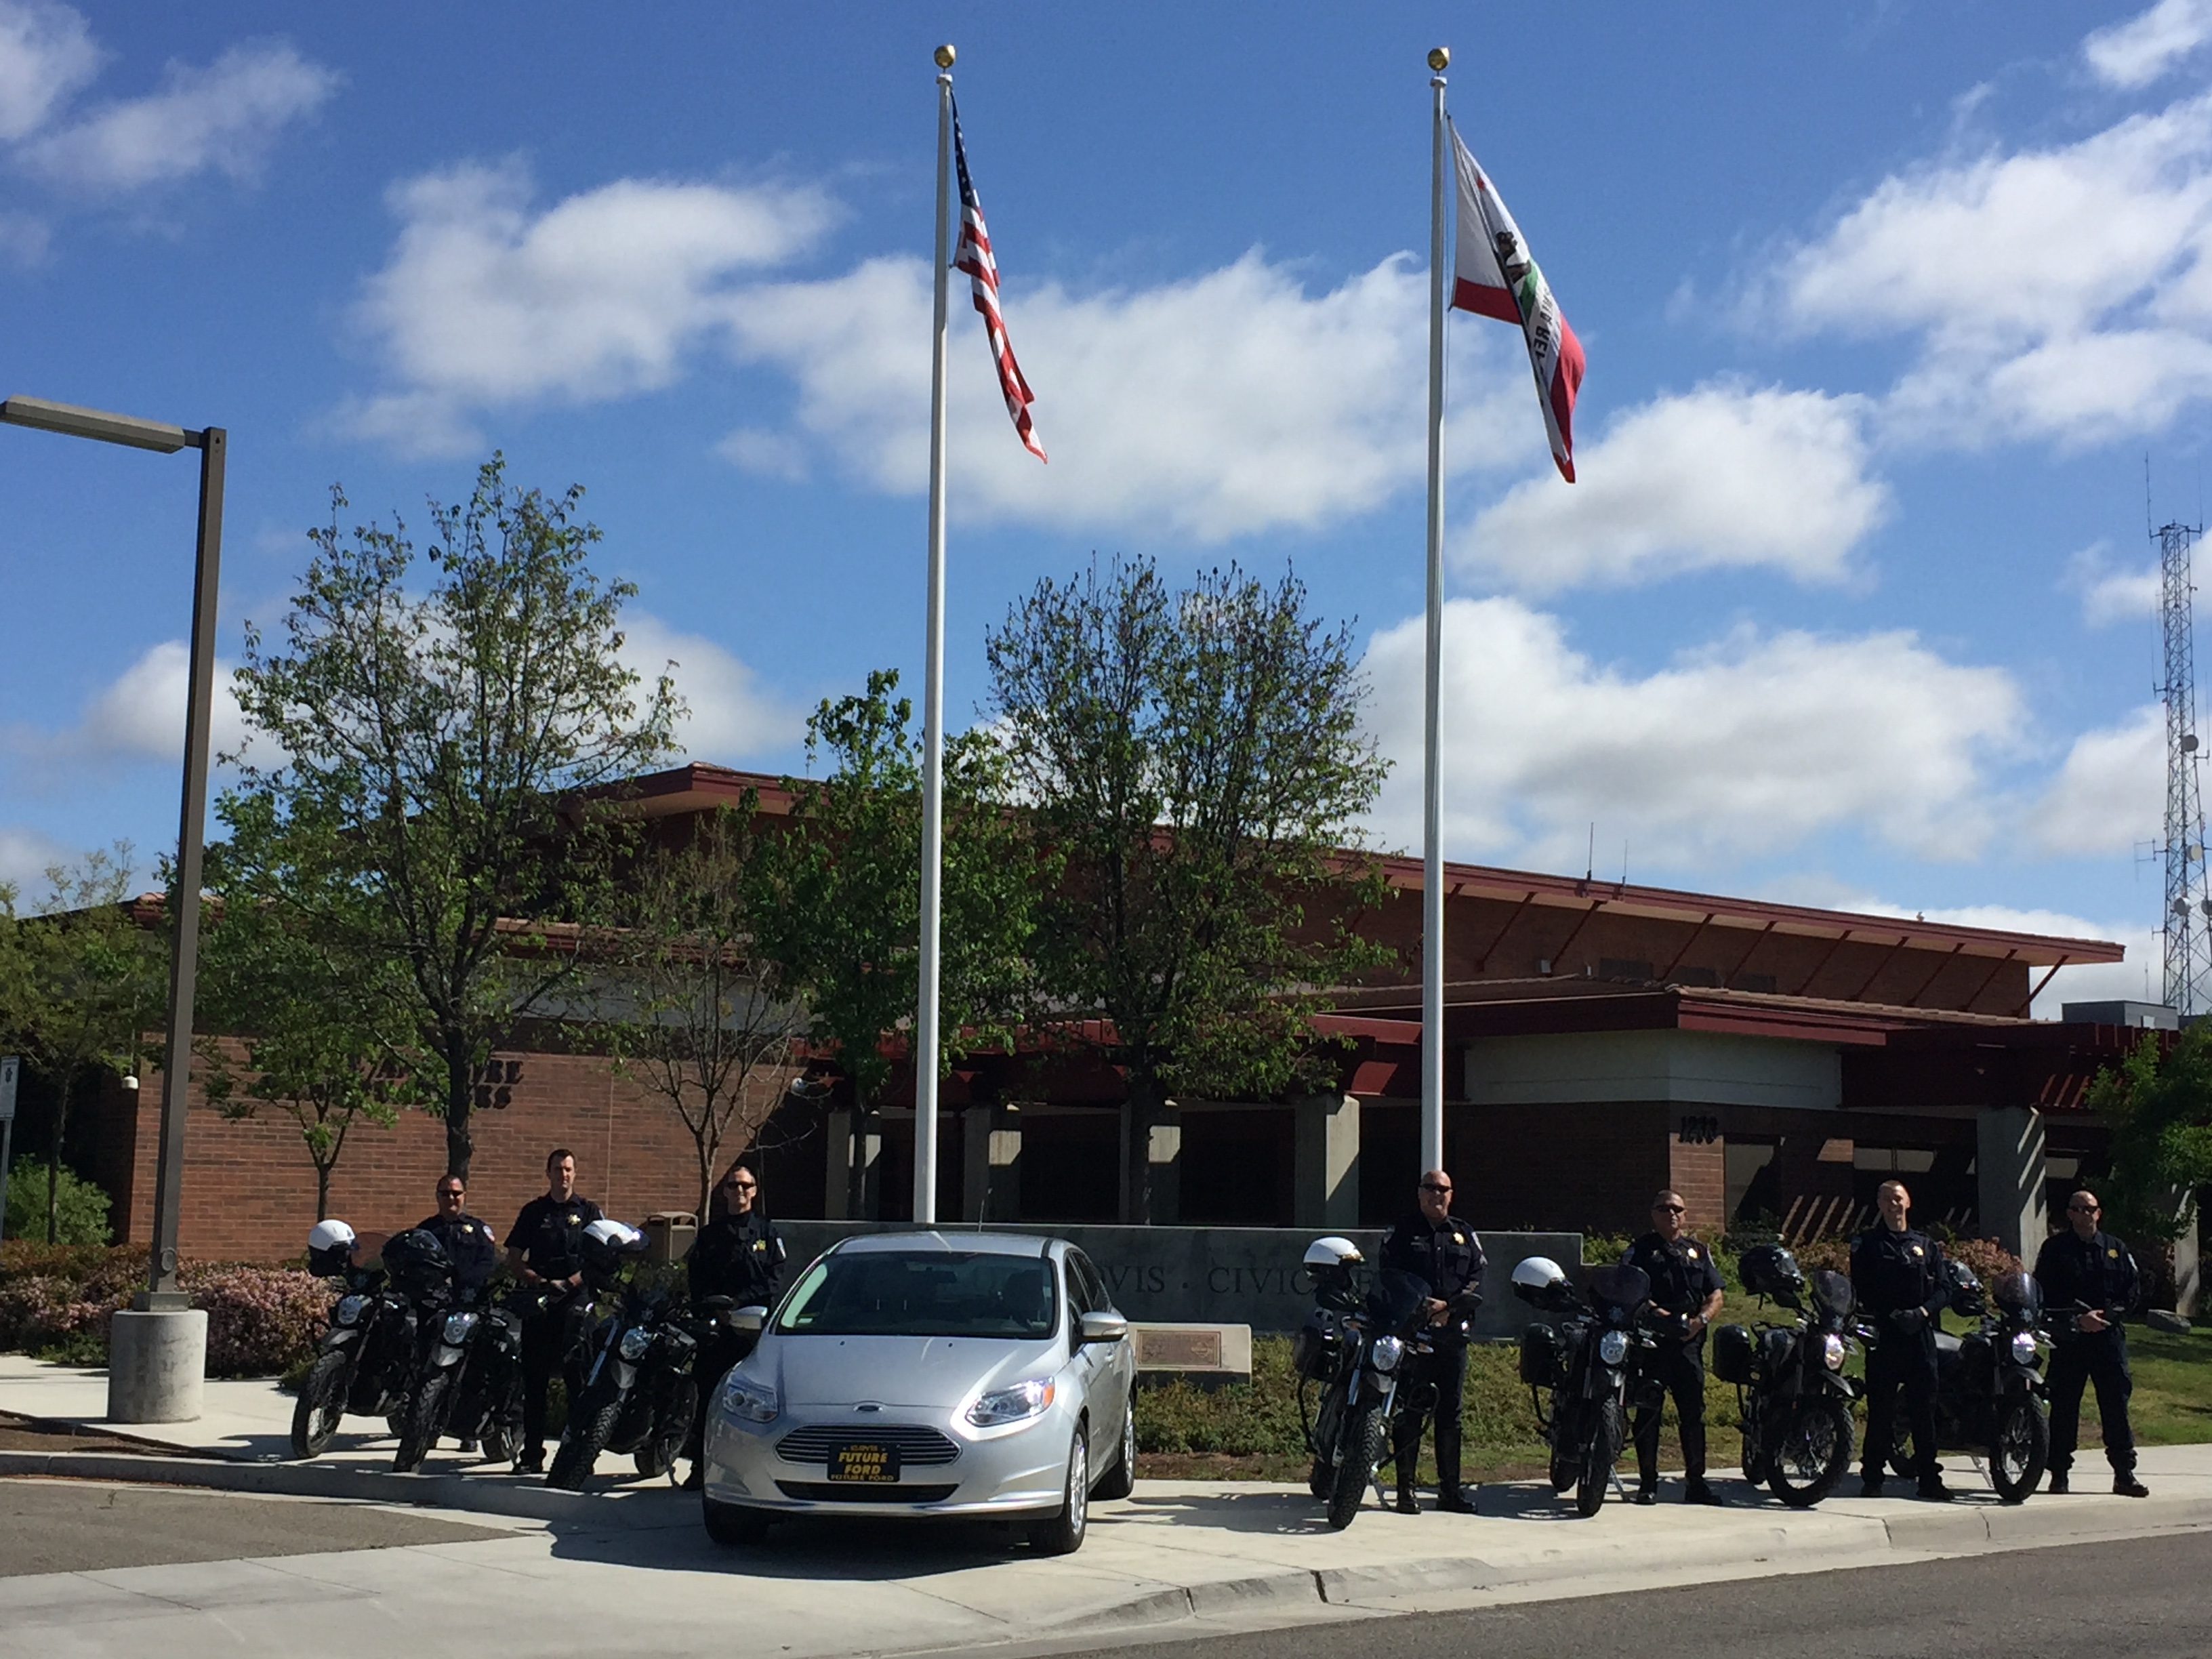 Read more about the article Clovis Police Unveil Largest Fleet of Zero Electric Police Motorcycles in the United States